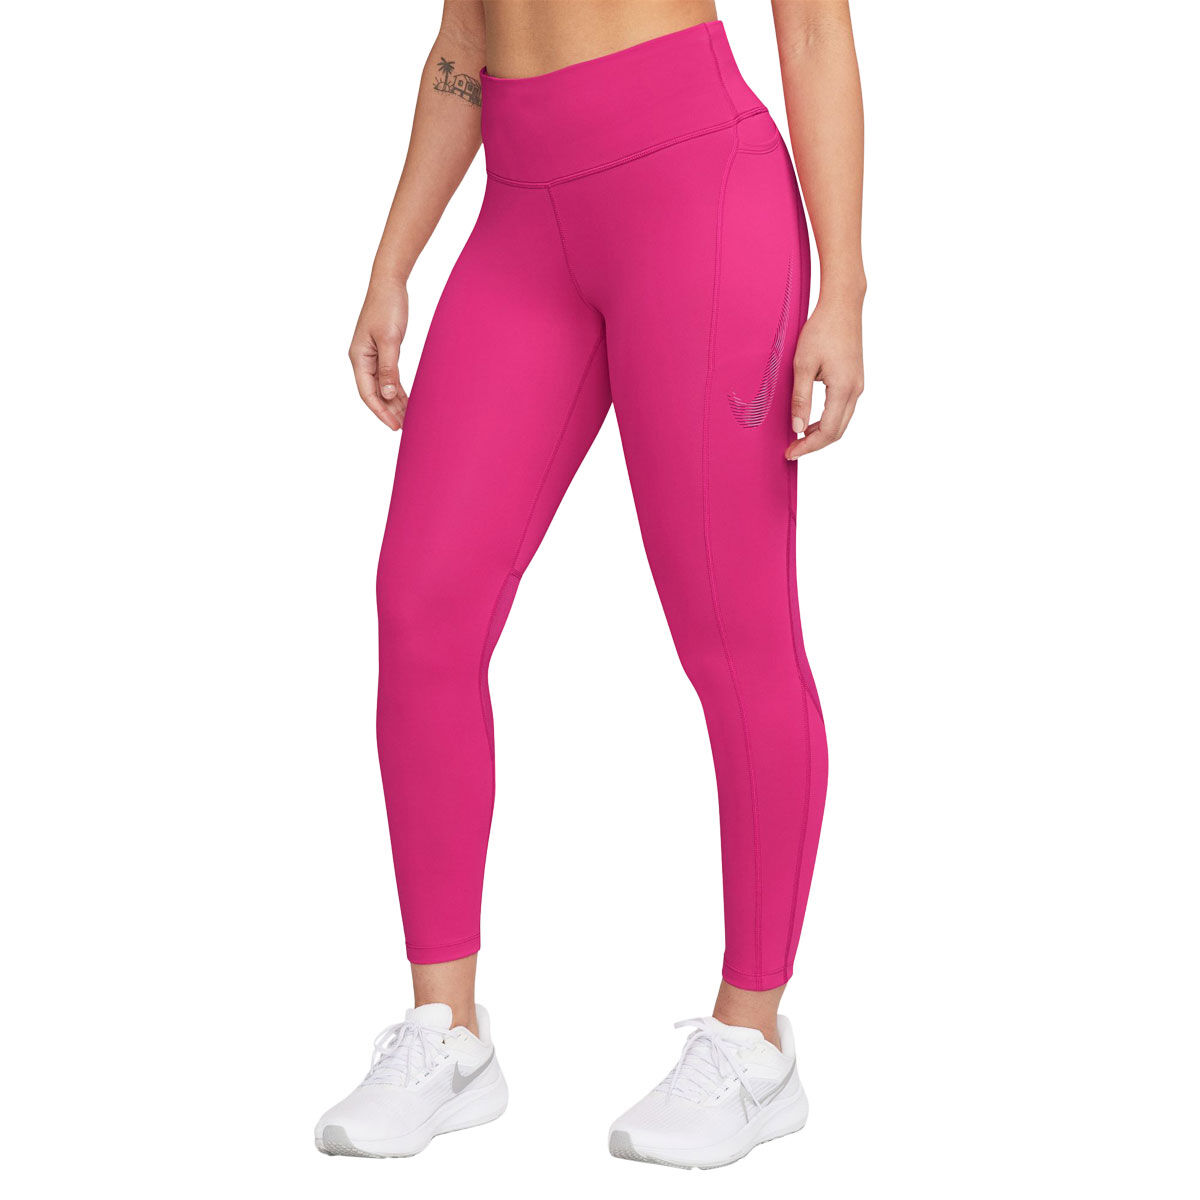 NWT NIKE POWER EPIC FAST TIGHT FIT NID RISE WOMEN'S RUNNING CROP LEGGINGS